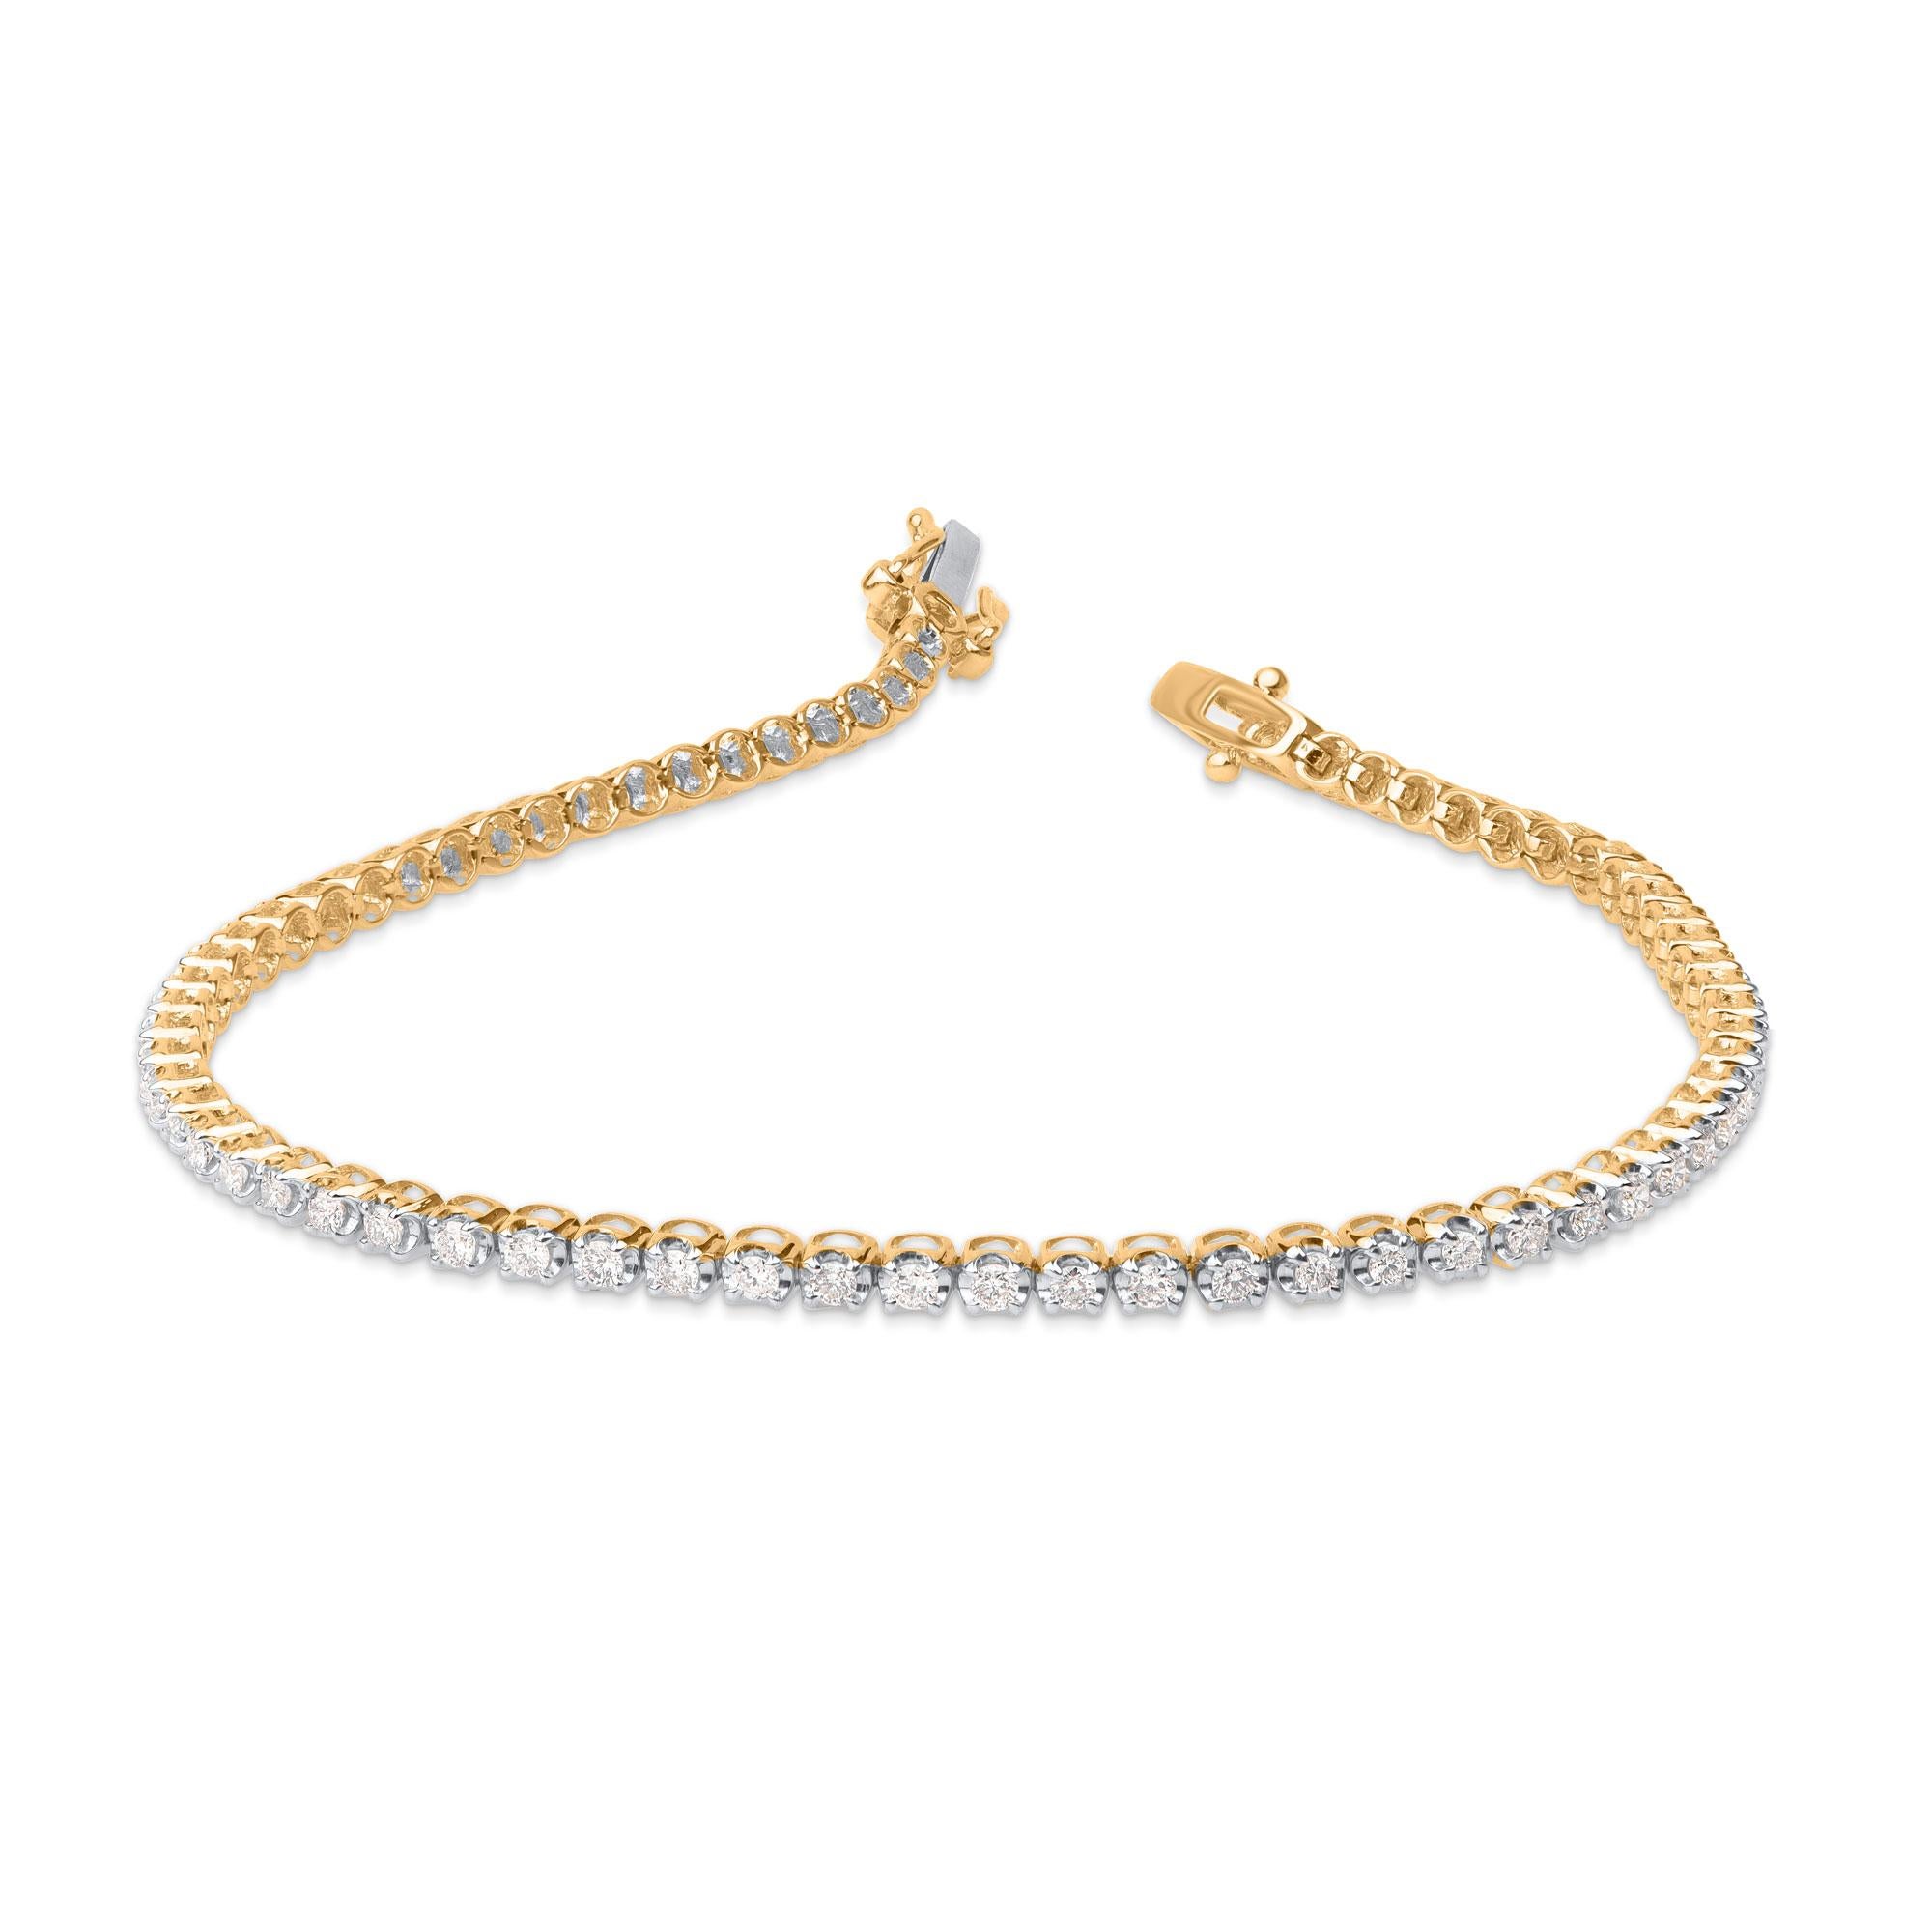 A classic tennis bracelet – perfect accessory for women with everyday attire. Elegantly designed in 10 kt yellow gold and embellished with 61 brilliant natural diamonds in prong setting. Diamonds are graded H-I Color, I2 Clarity. 
